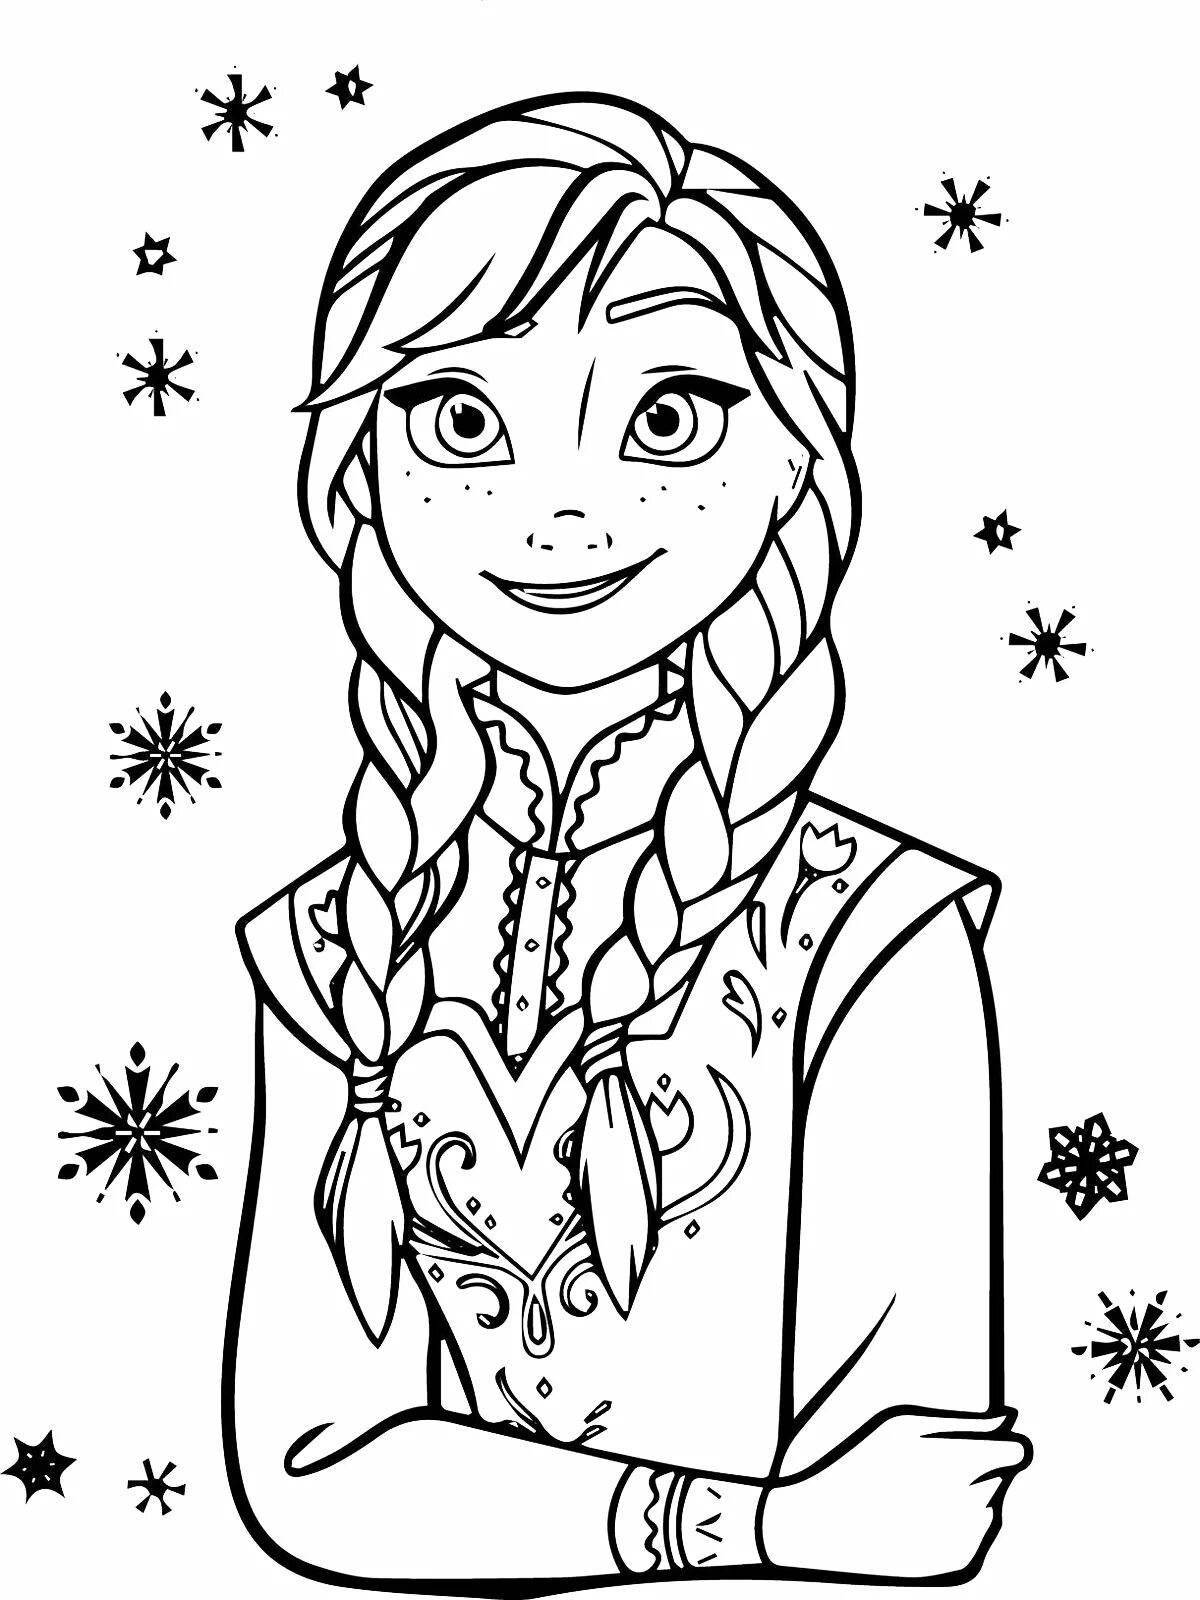 Anna's funny coloring book for kids